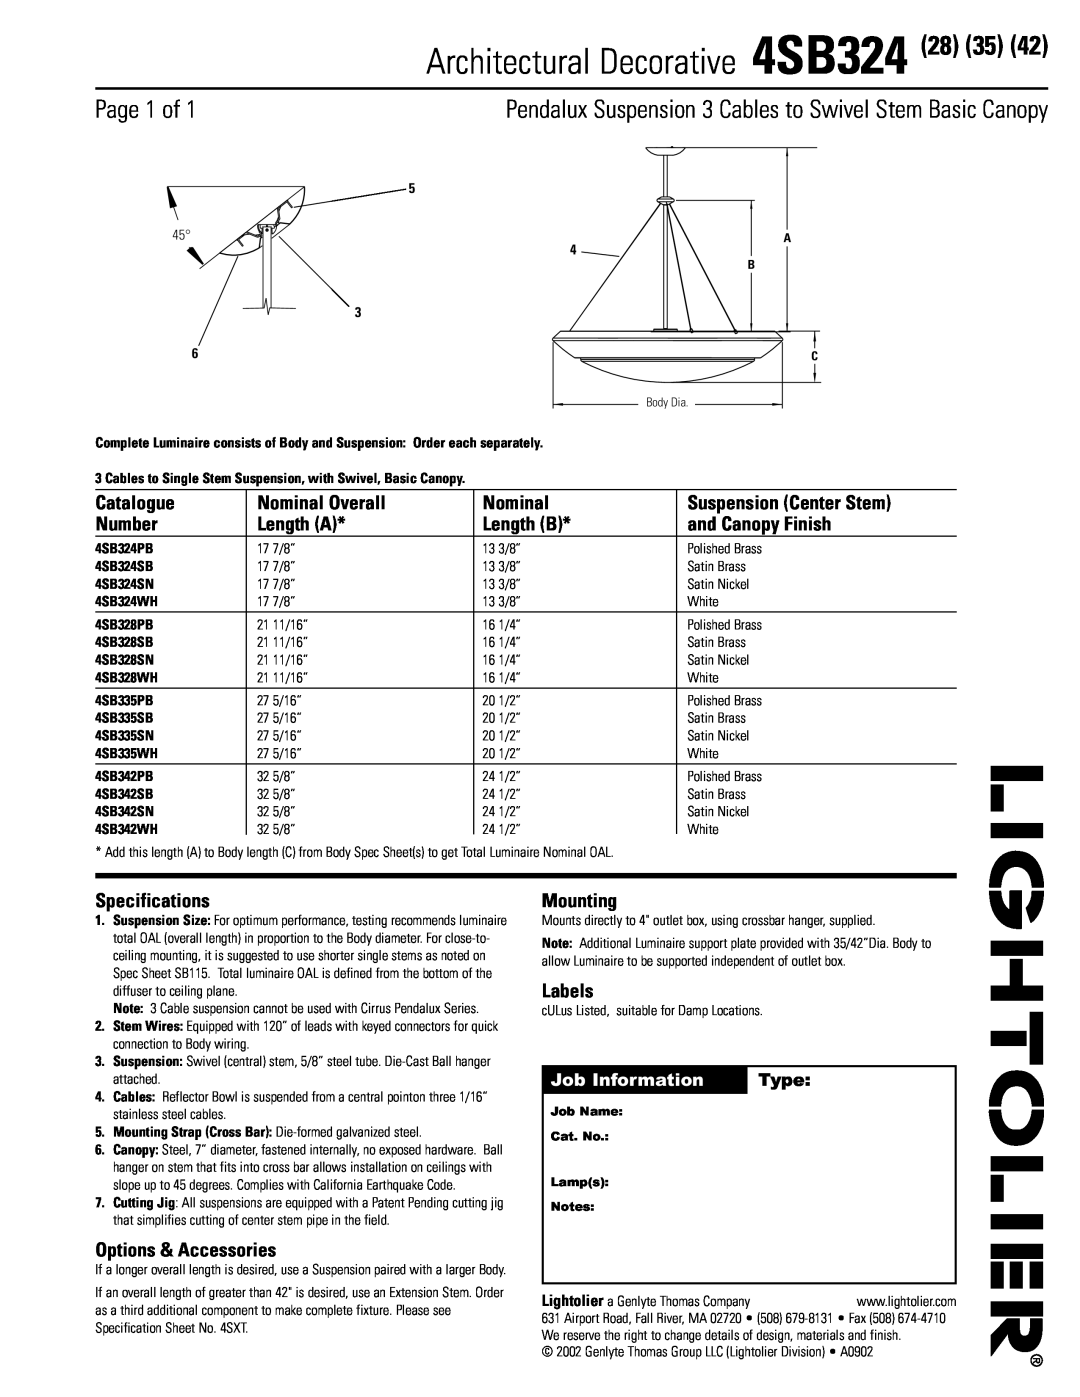 Lightolier 4SB324 specifications Page 1 of 